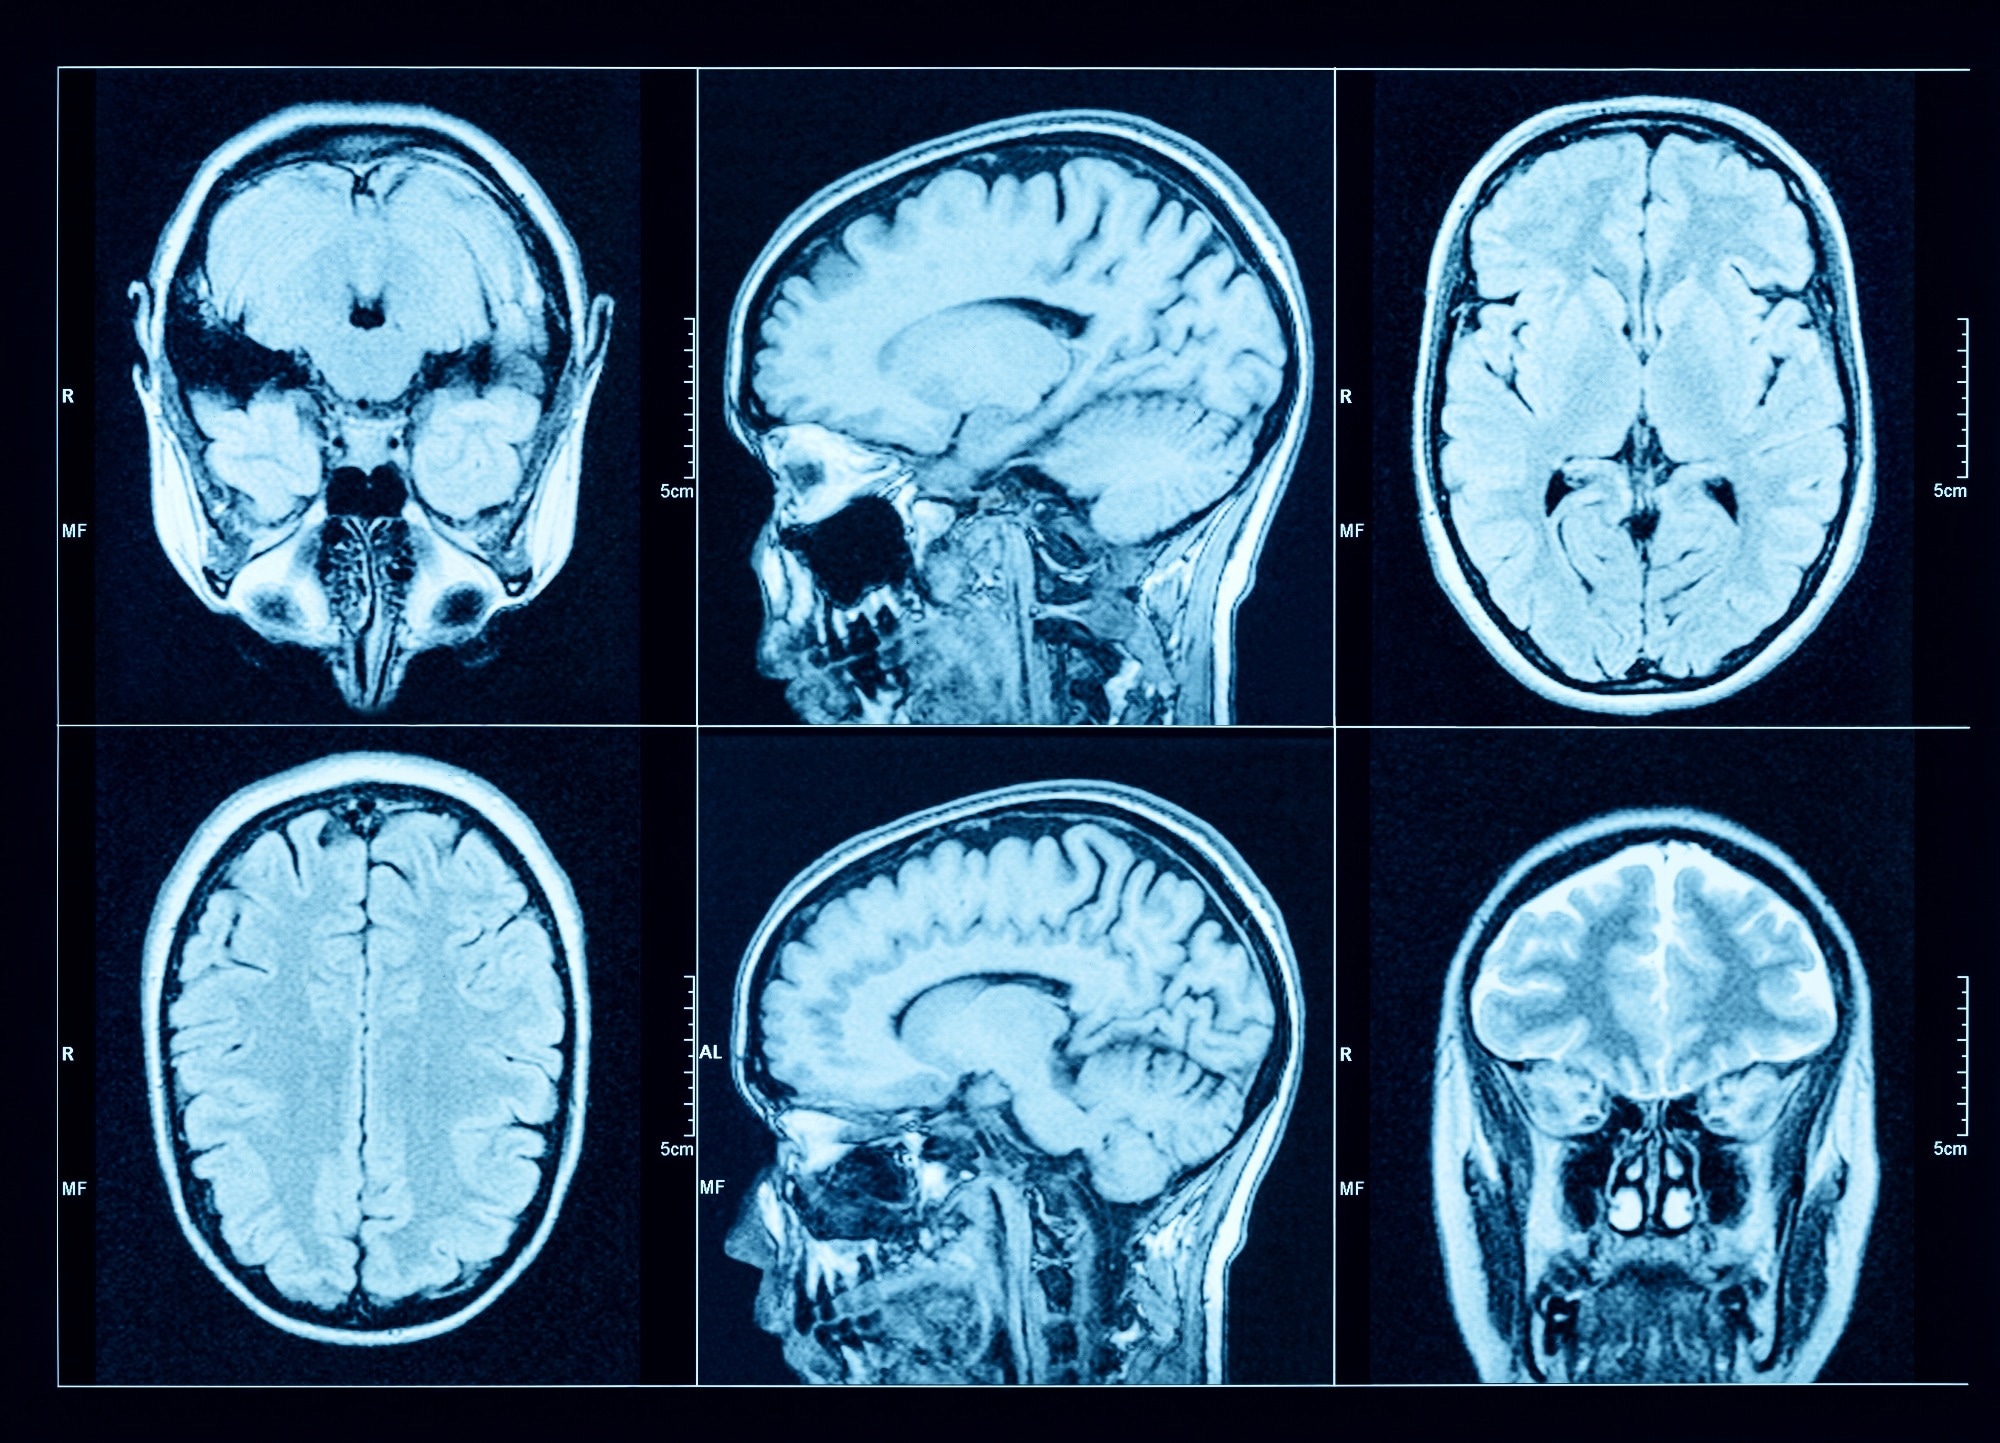 Study: Association of gout with brain reserve and vulnerability to neurodegenerative disease. Image Credit: Triff / Shutterstock.com